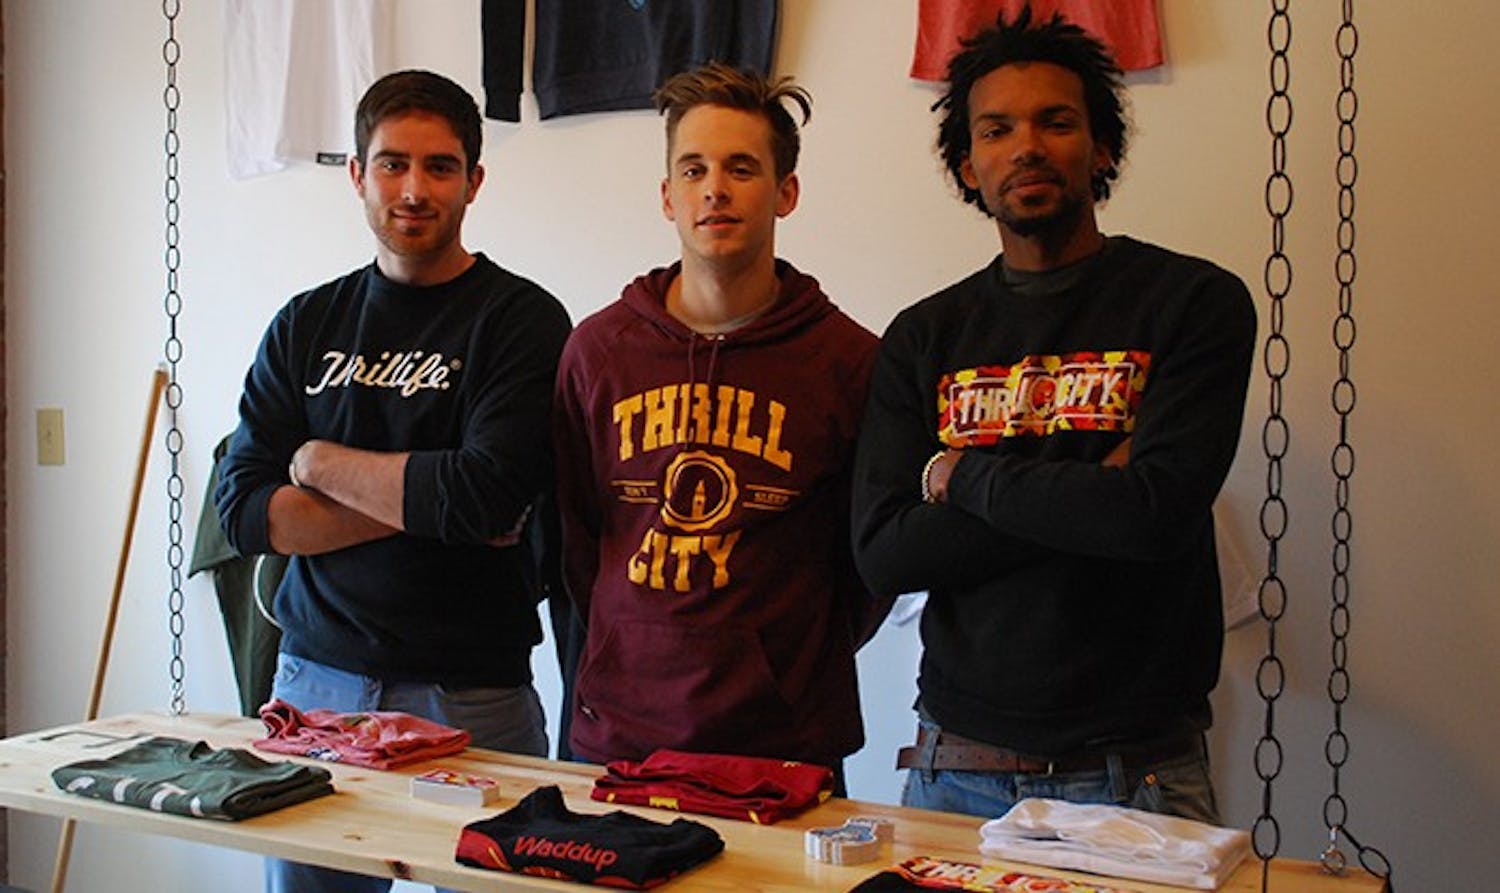 Some UNC students are opening a store for Thrill City, their brand that they have started. They'll sell their apparel and feature other brands in the area. 